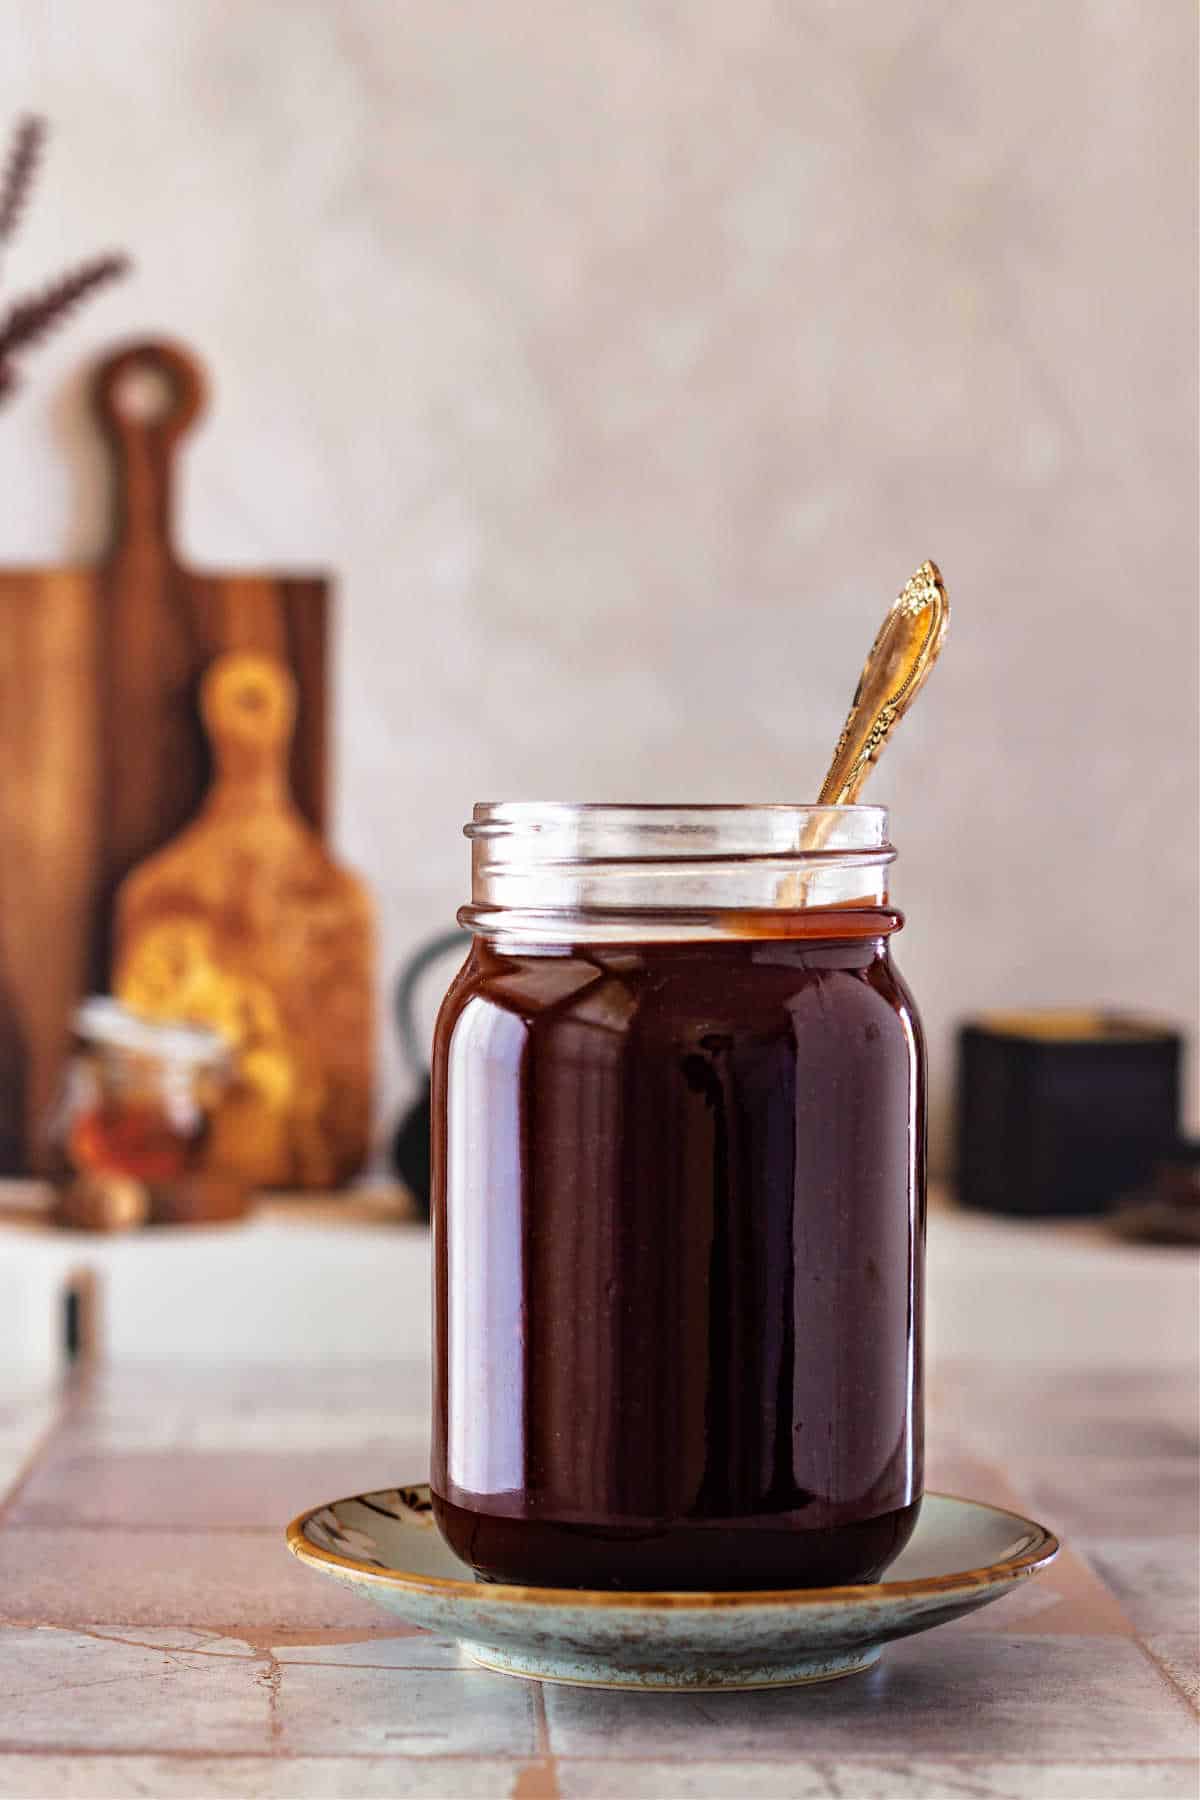 A glass jar full of fudge sauce with a spoon in it. It's shot on small gray tiles with a couple of cutting boards propped up in the background.